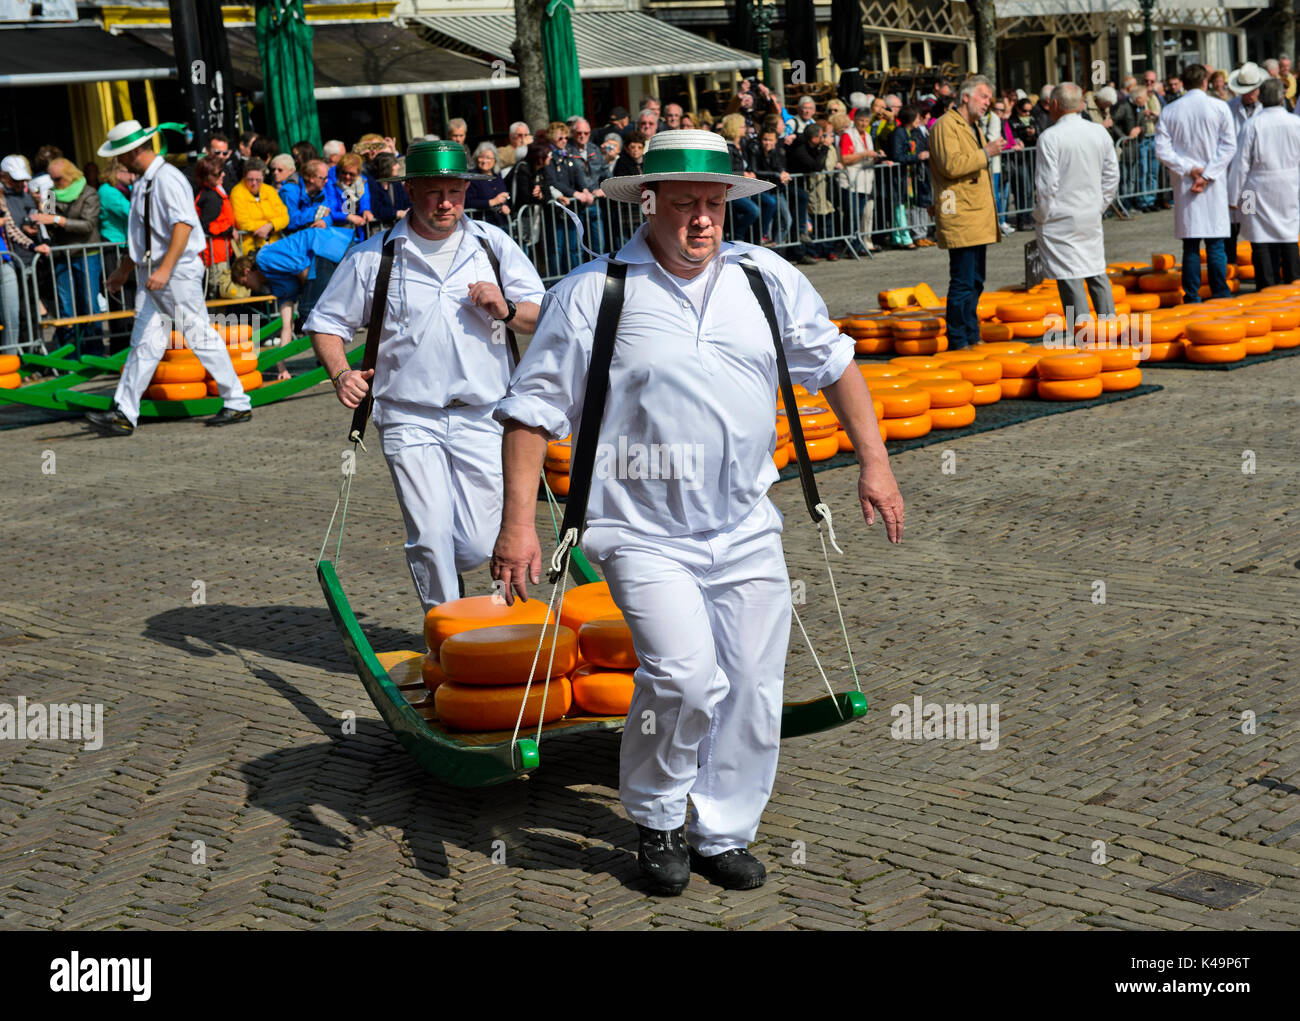 Cheese Porters Carrying Cheese Truckles At The Cheese Market Of Alkmaar, Netherlands Stock Photo